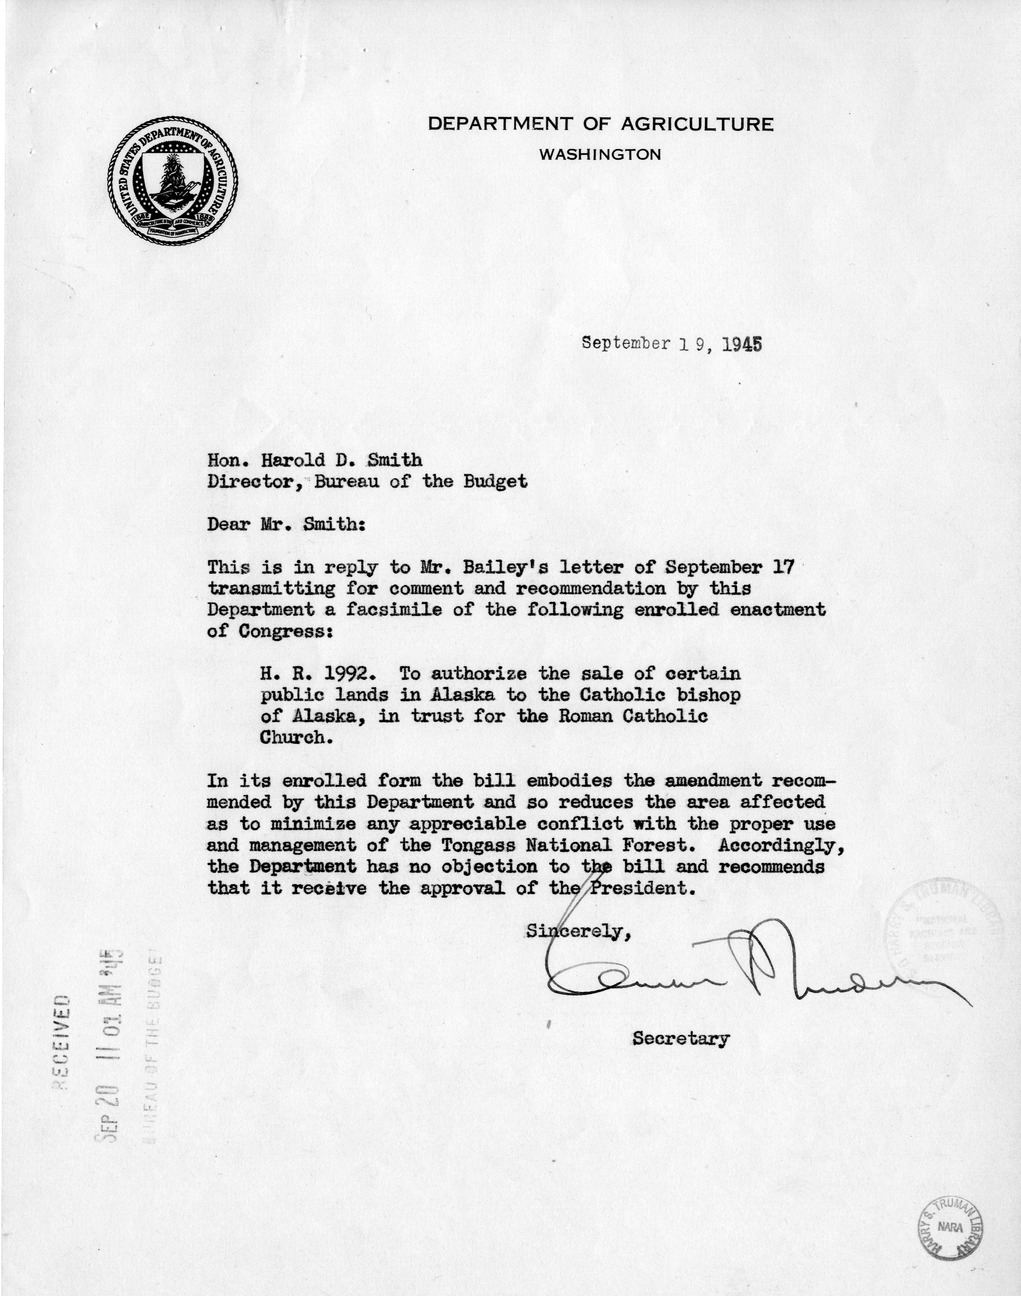 Memorandum from Frederick J. Bailey to M. C. Latta, H.R. 1992, To Authorize the Sale of Certain Public Lands in Alaska to the Catholic Bishop of Alaska, in Trust for the Roman Catholic Church, with Attachments